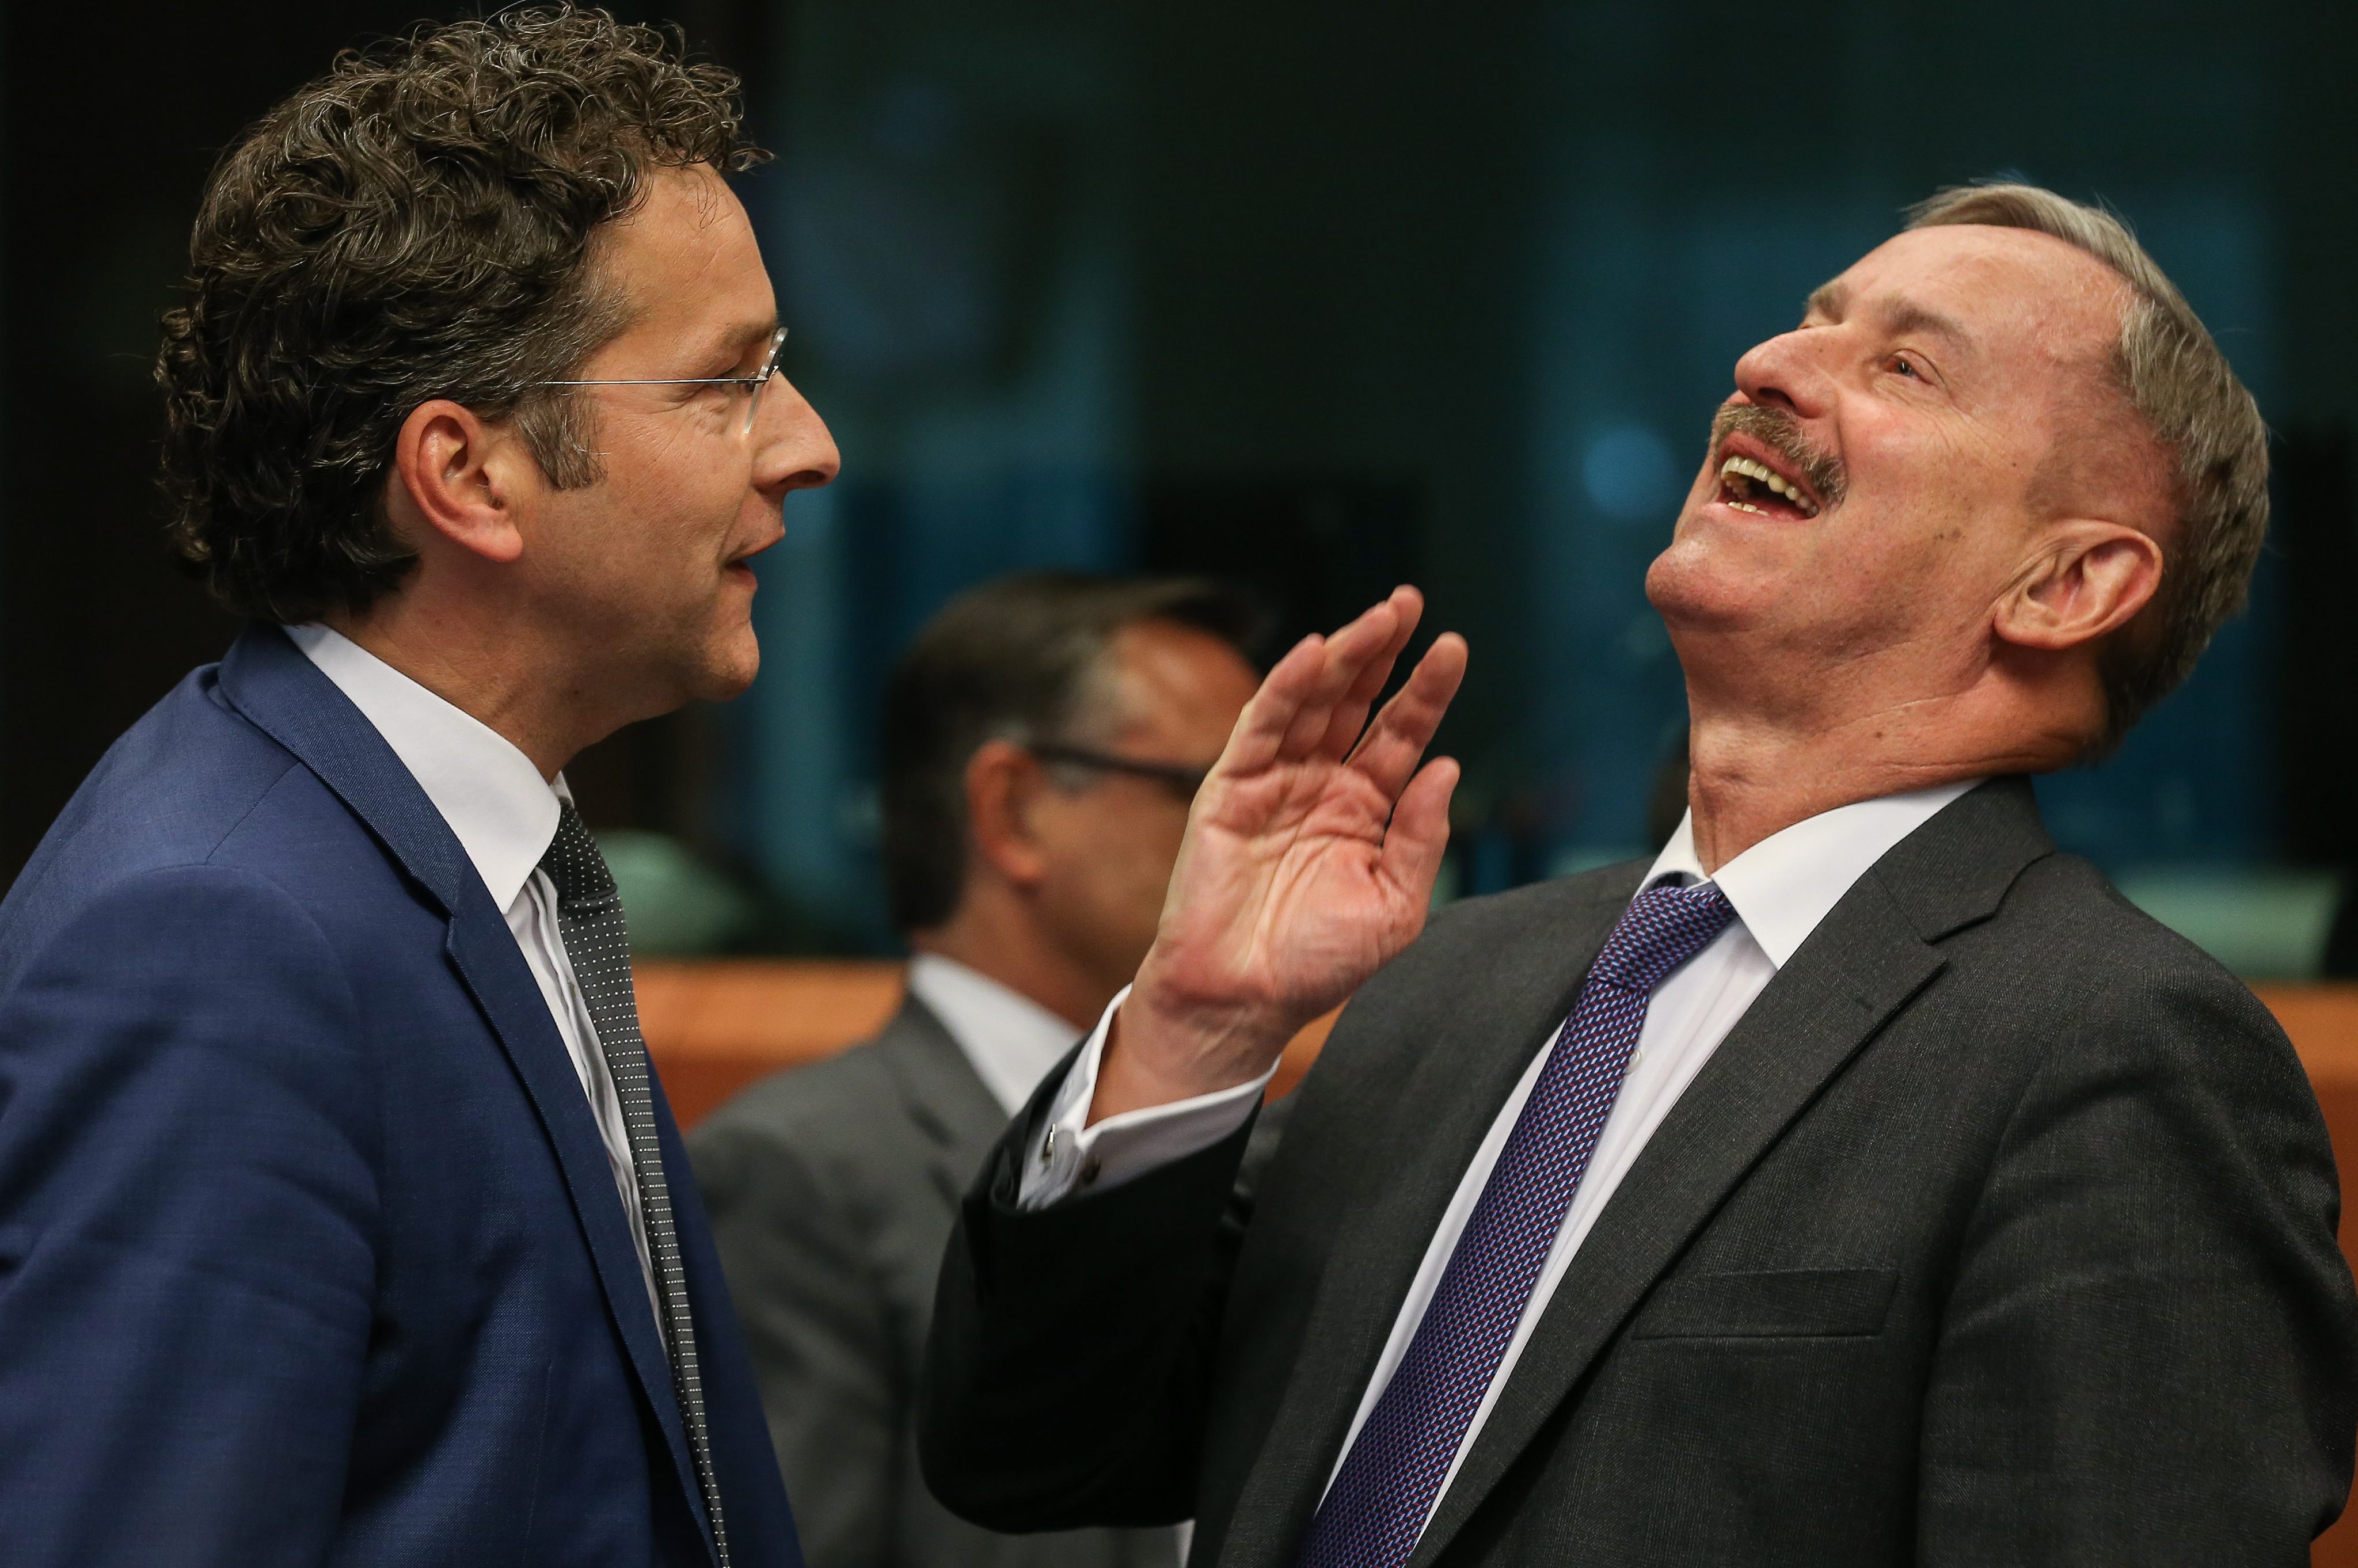 2014-05-05 15:09:14 epa04192269 Eurogroup President and Dutch Finance Minister Jeroen Dijsselbloem (L) and European Commissioner acting for Economic and Monetary Affairs Siim Kallas (R) chat at the start of Eurogroup Finance Ministers meeting at EU council headquarters, in Brussels, Belgium, 05 May 2014. EPA/JULIEN WARNAND